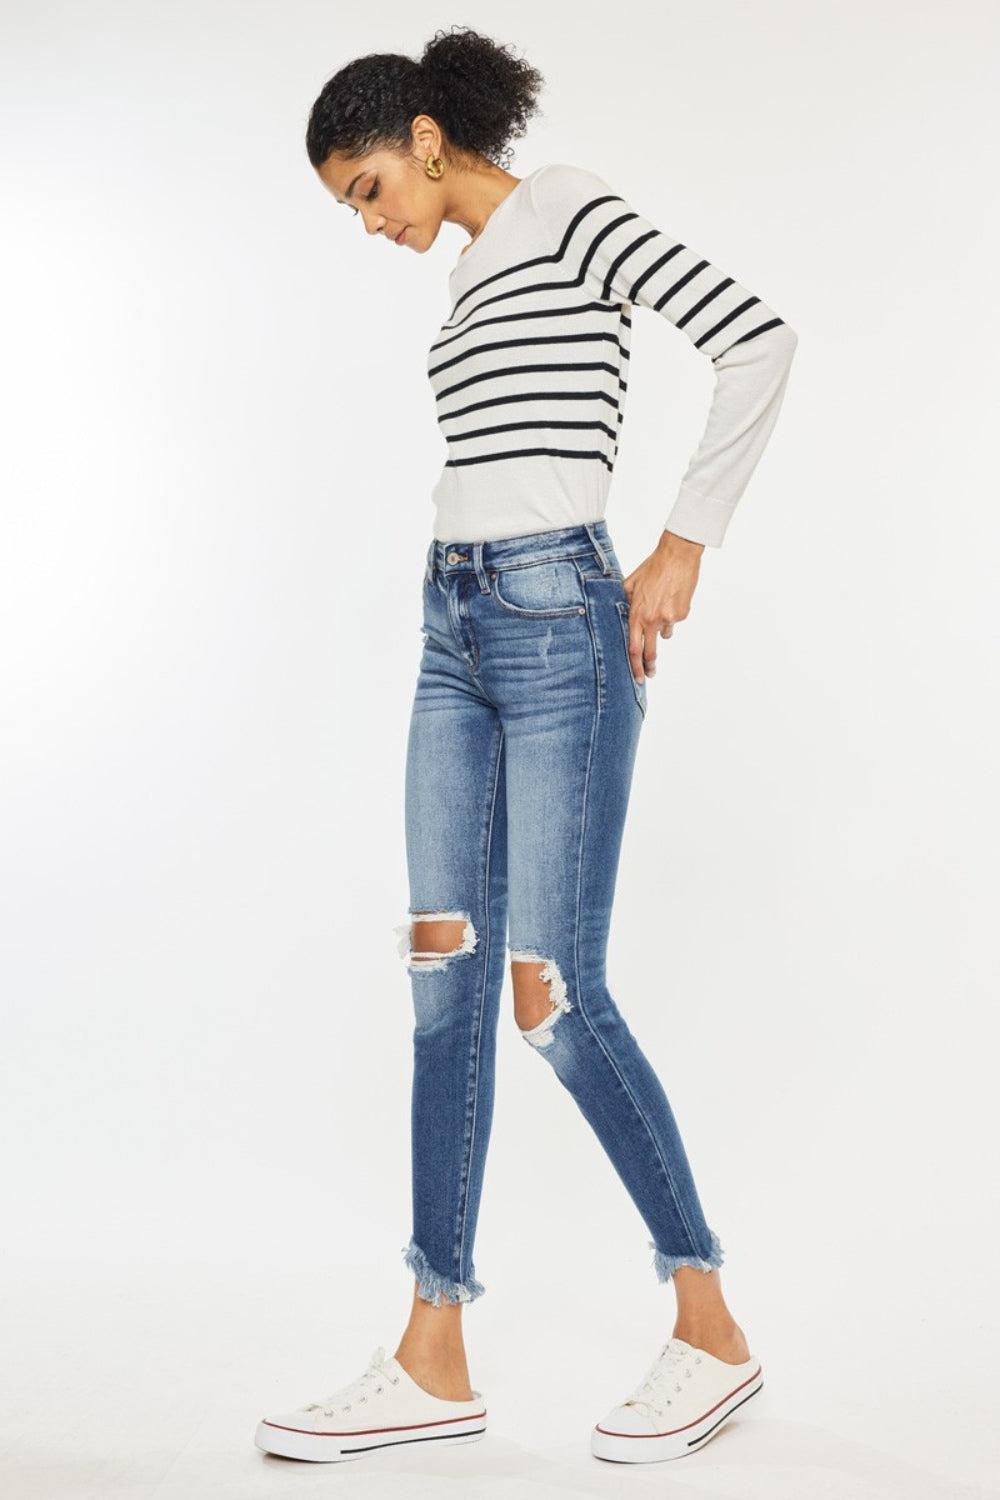 a woman wearing ripped jeans and a striped sweater